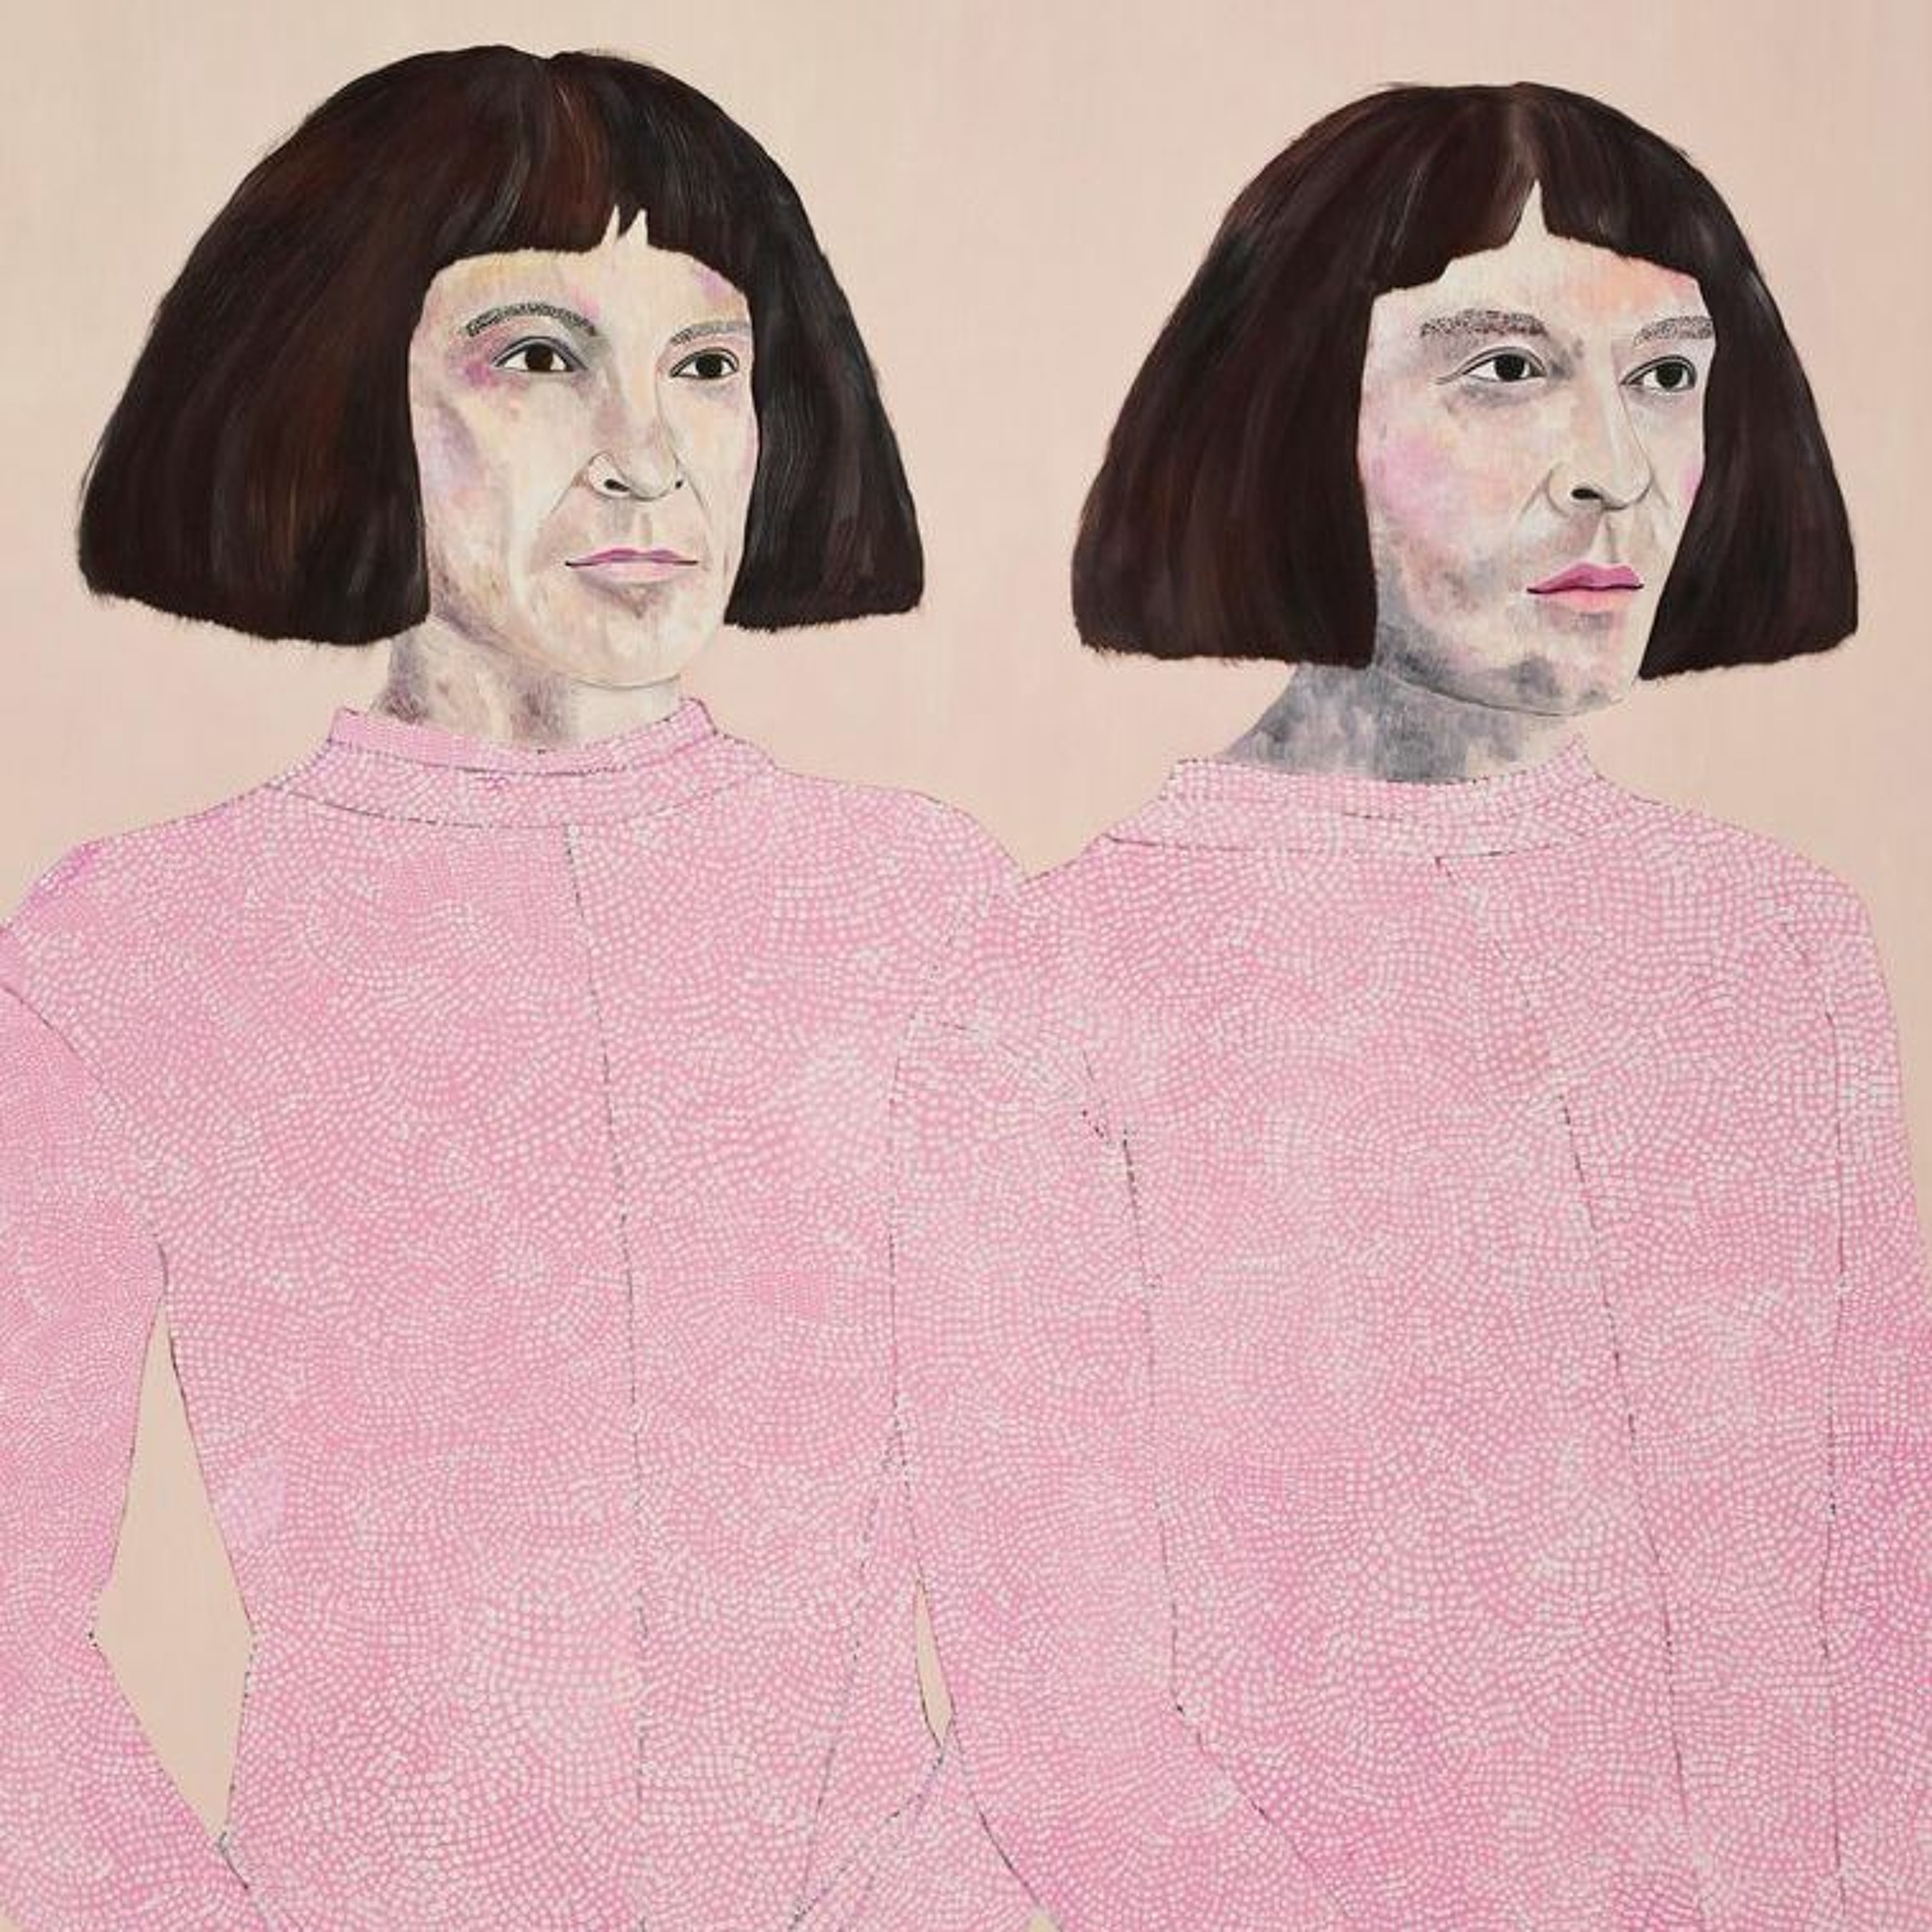 Tuesday Talk - Elle Freak makes closing remarks on Archie 100: A century of the Archibald Prize